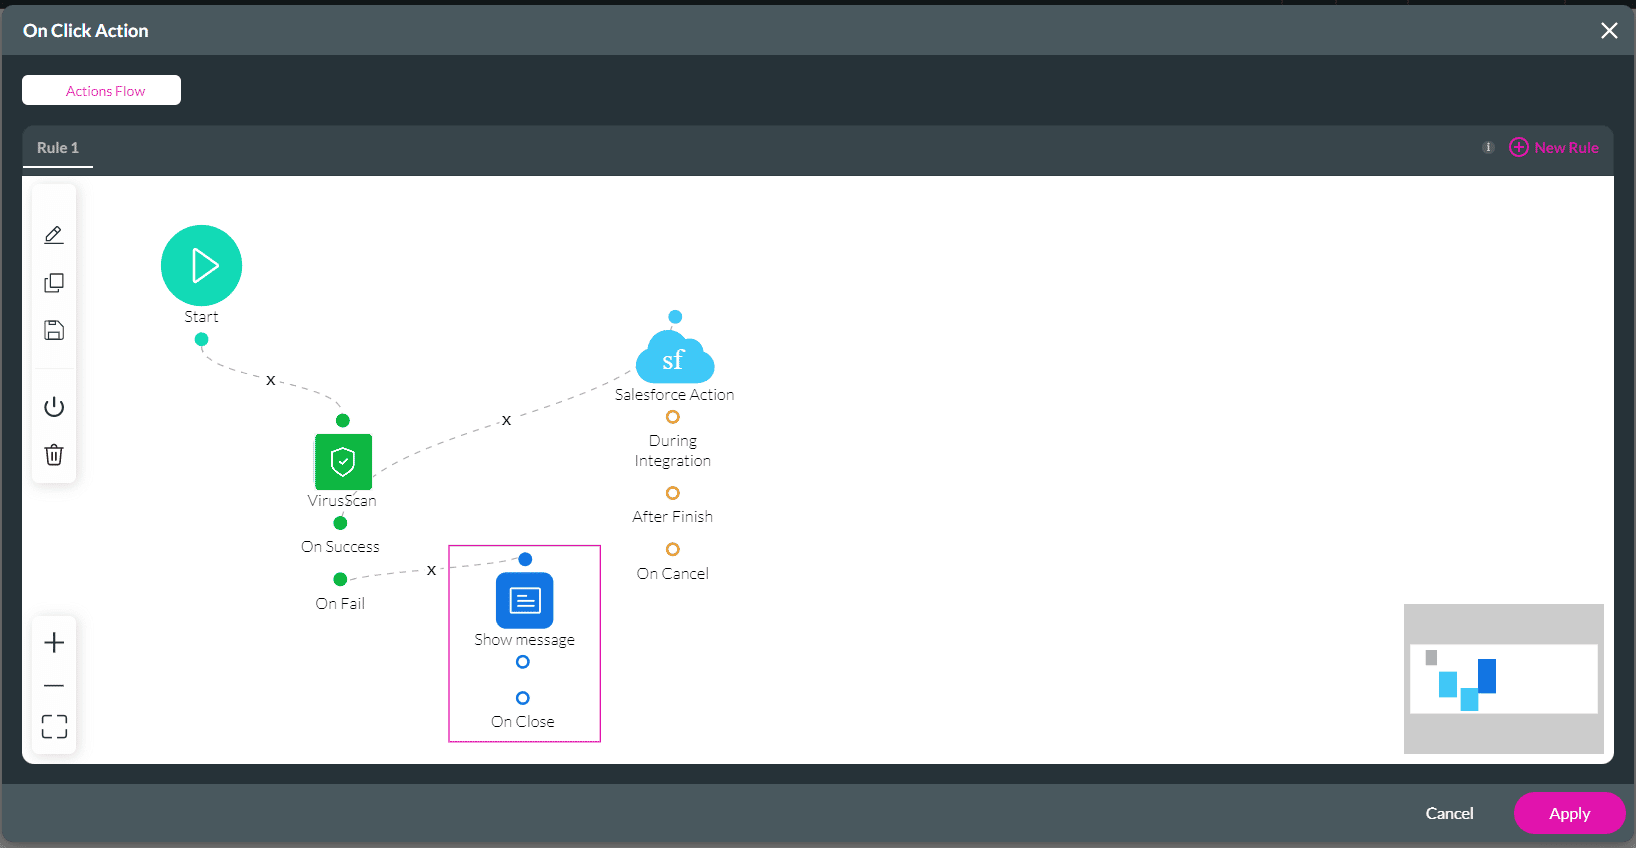 Node added to On Click Action screen